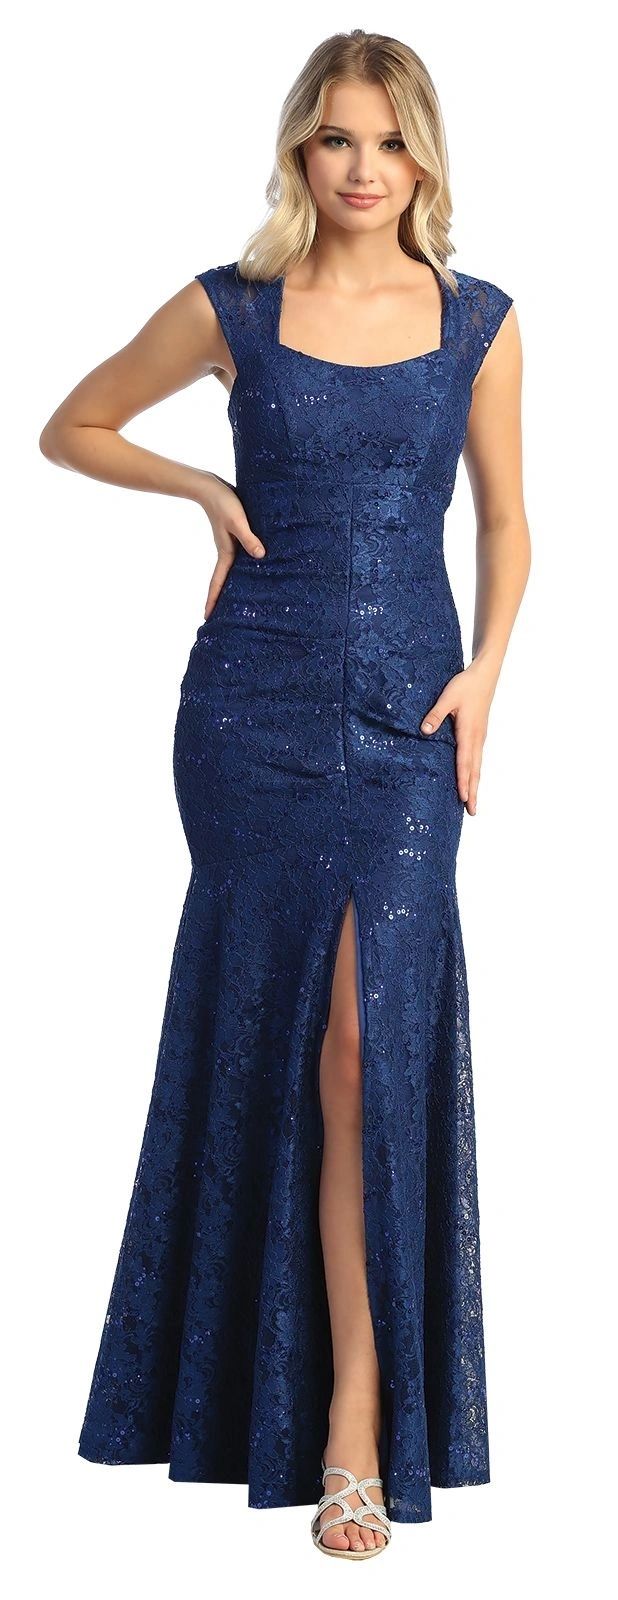 mermaid evening gown